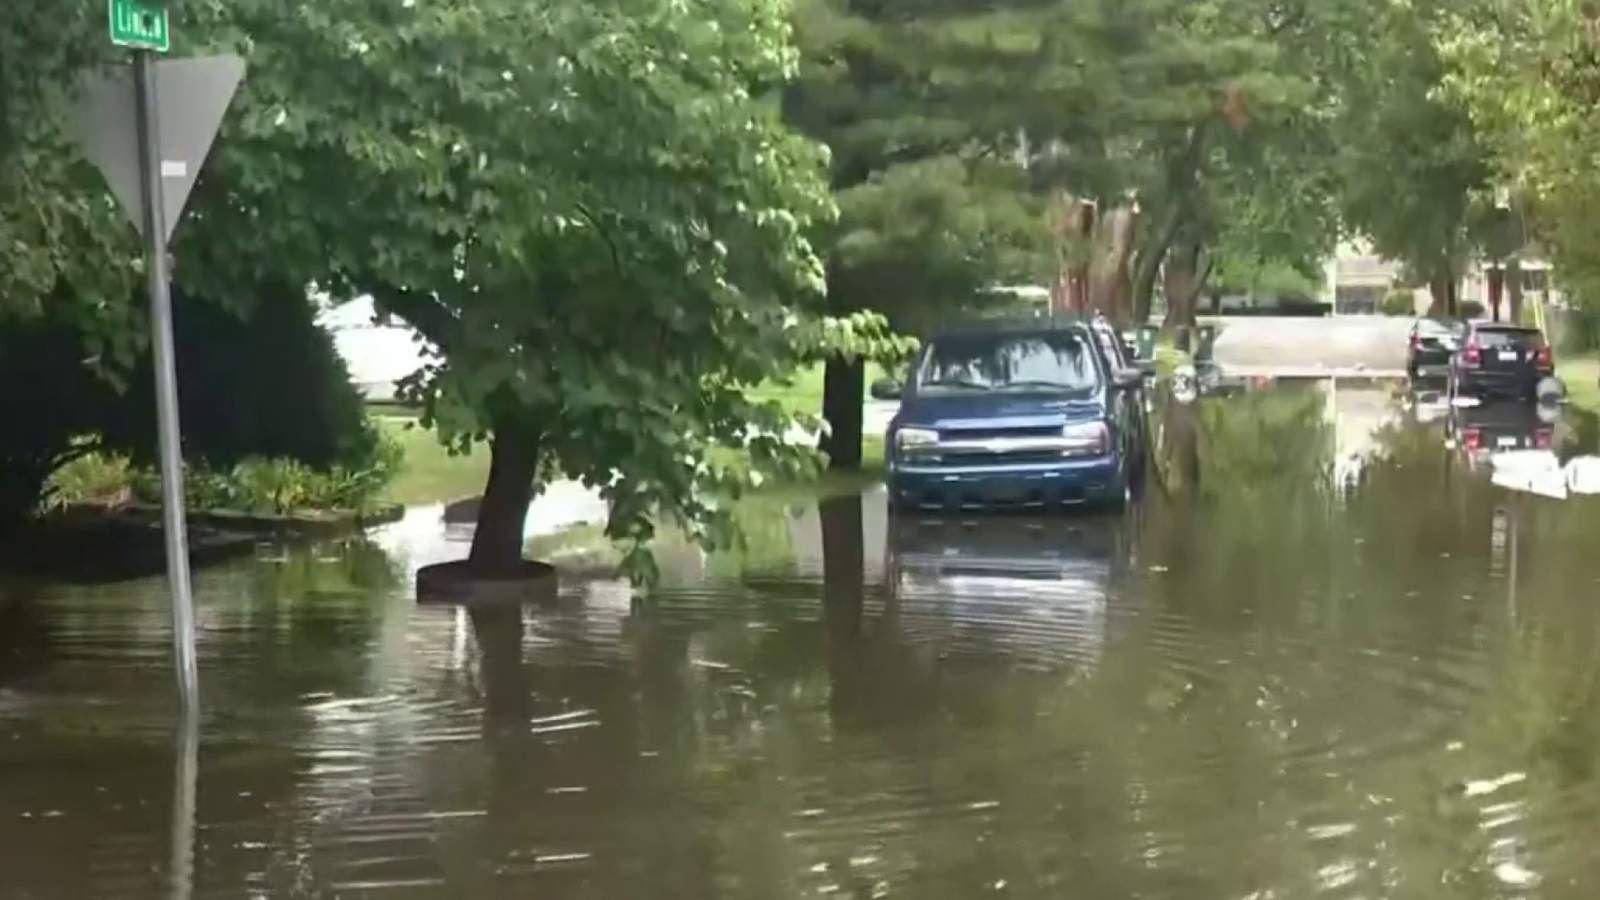 Royal Oak residents considering legal action after repeated flooding